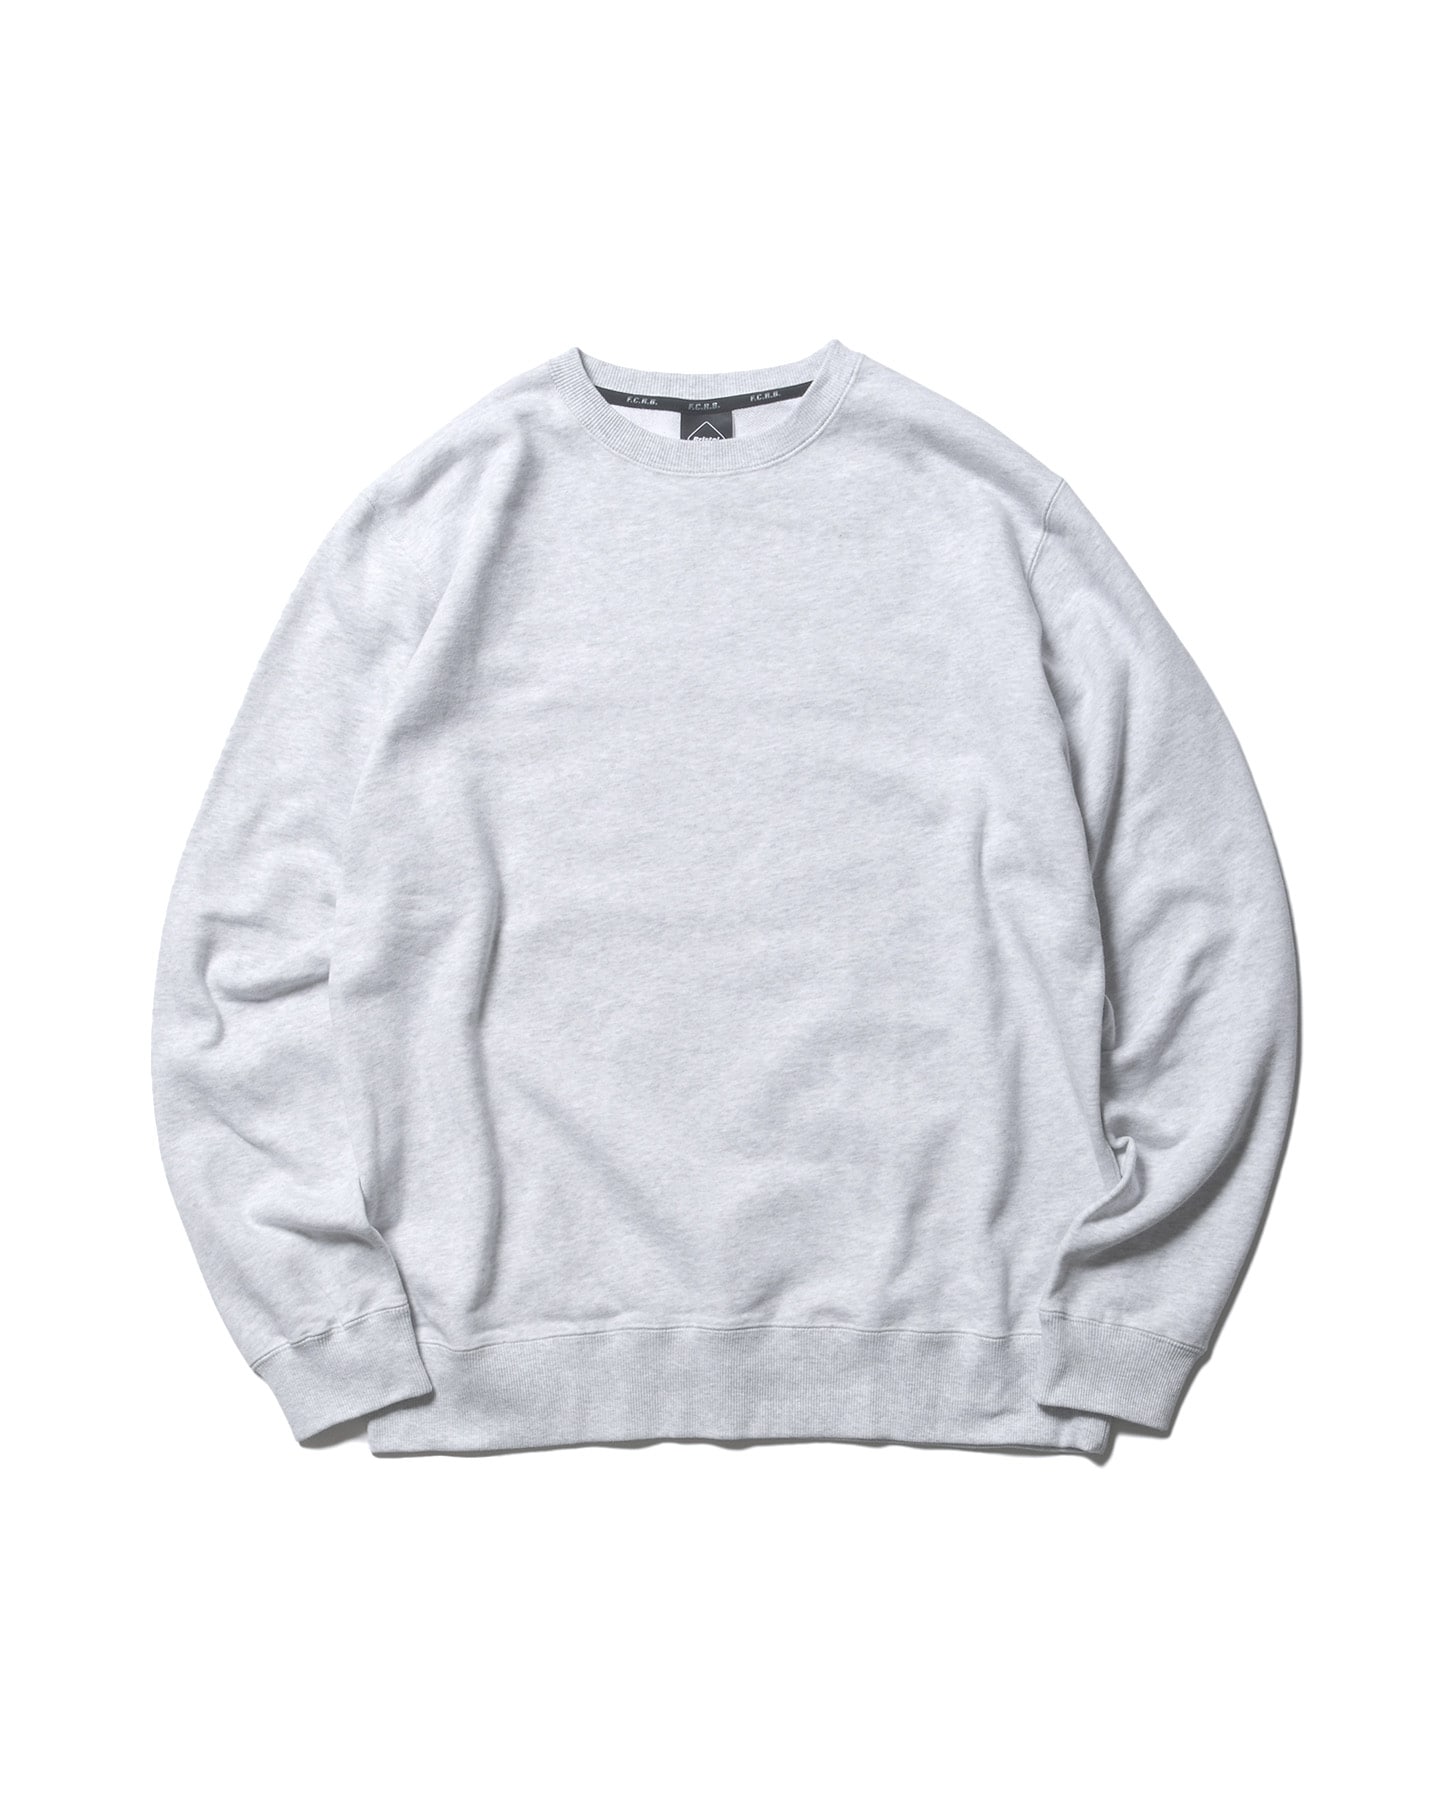 SOPH. | SYNTHETIC LEATHER APPLIQUE CREWNECK SWEAT(M GRAY):